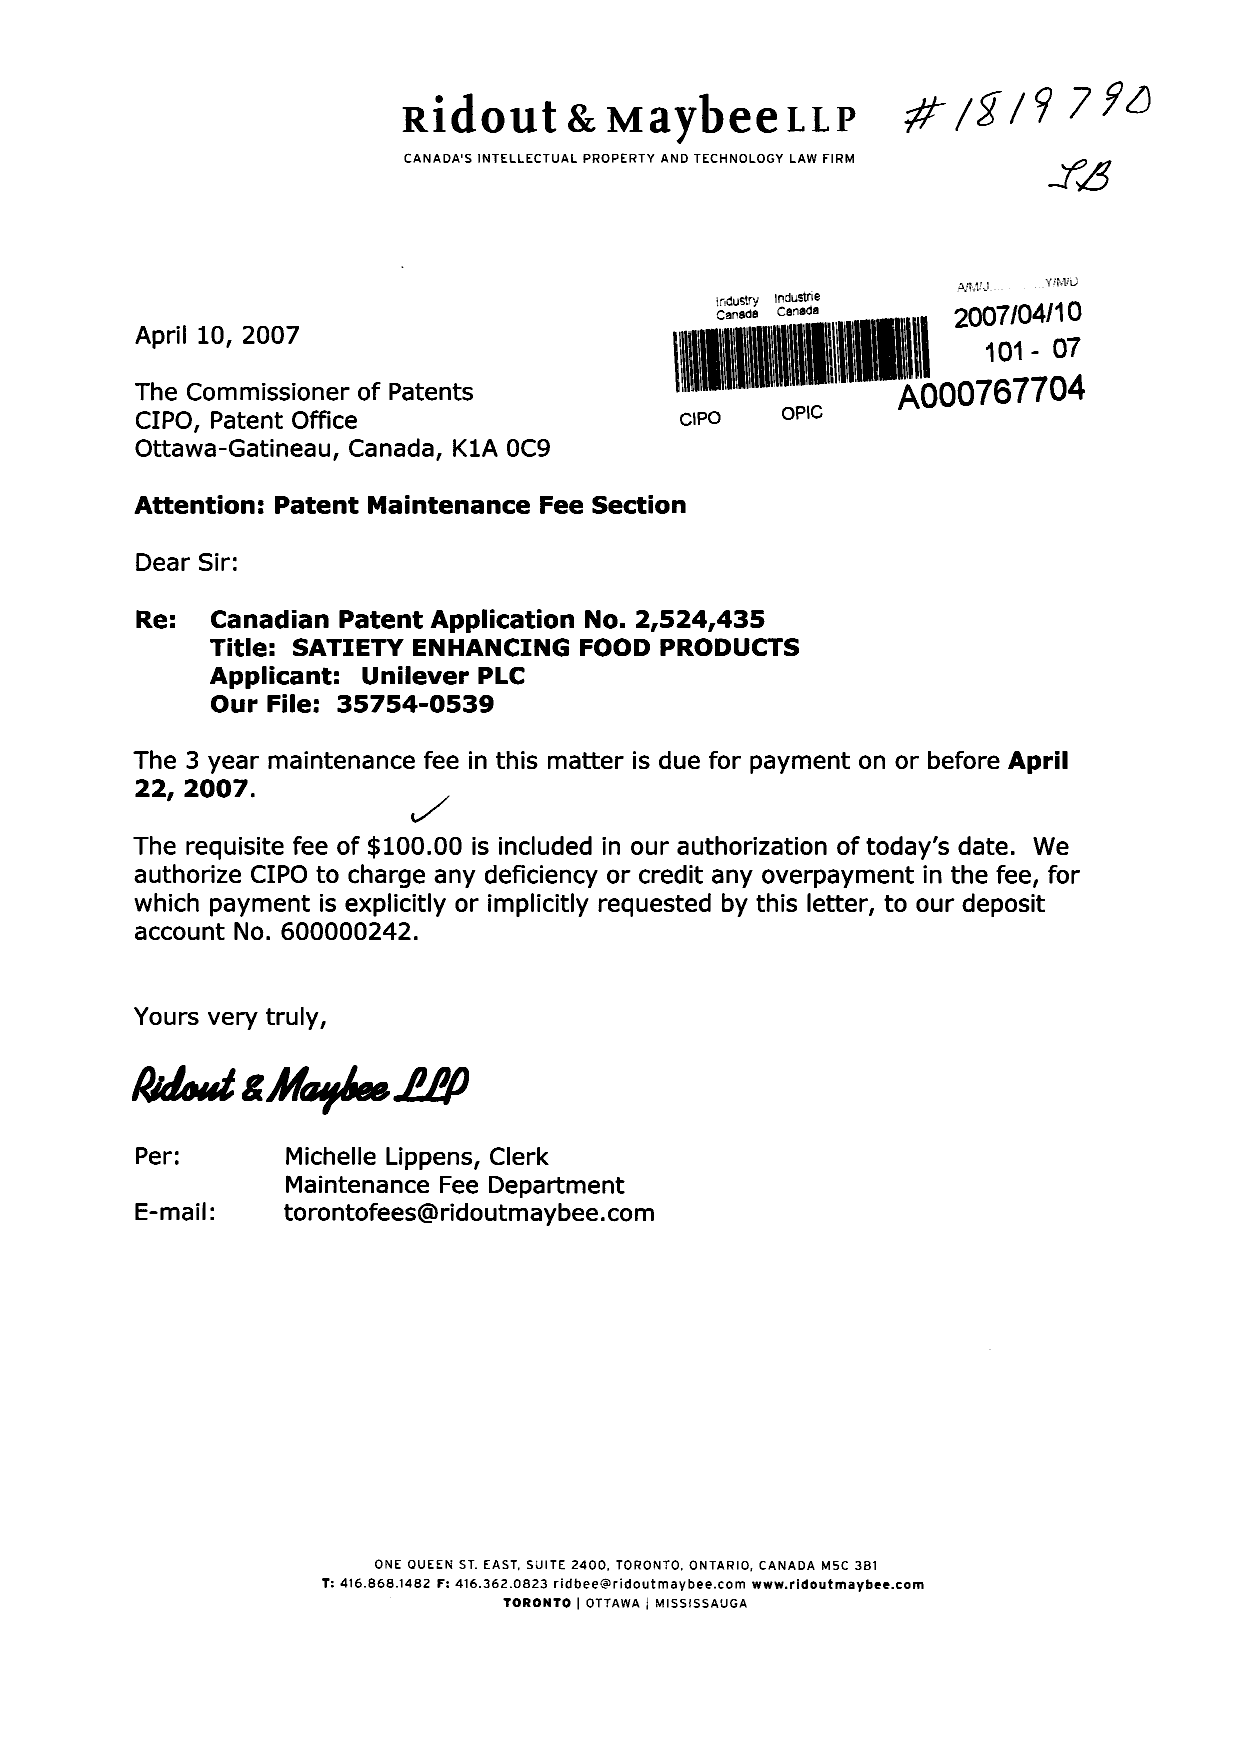 Canadian Patent Document 2524435. Fees 20070410. Image 1 of 1